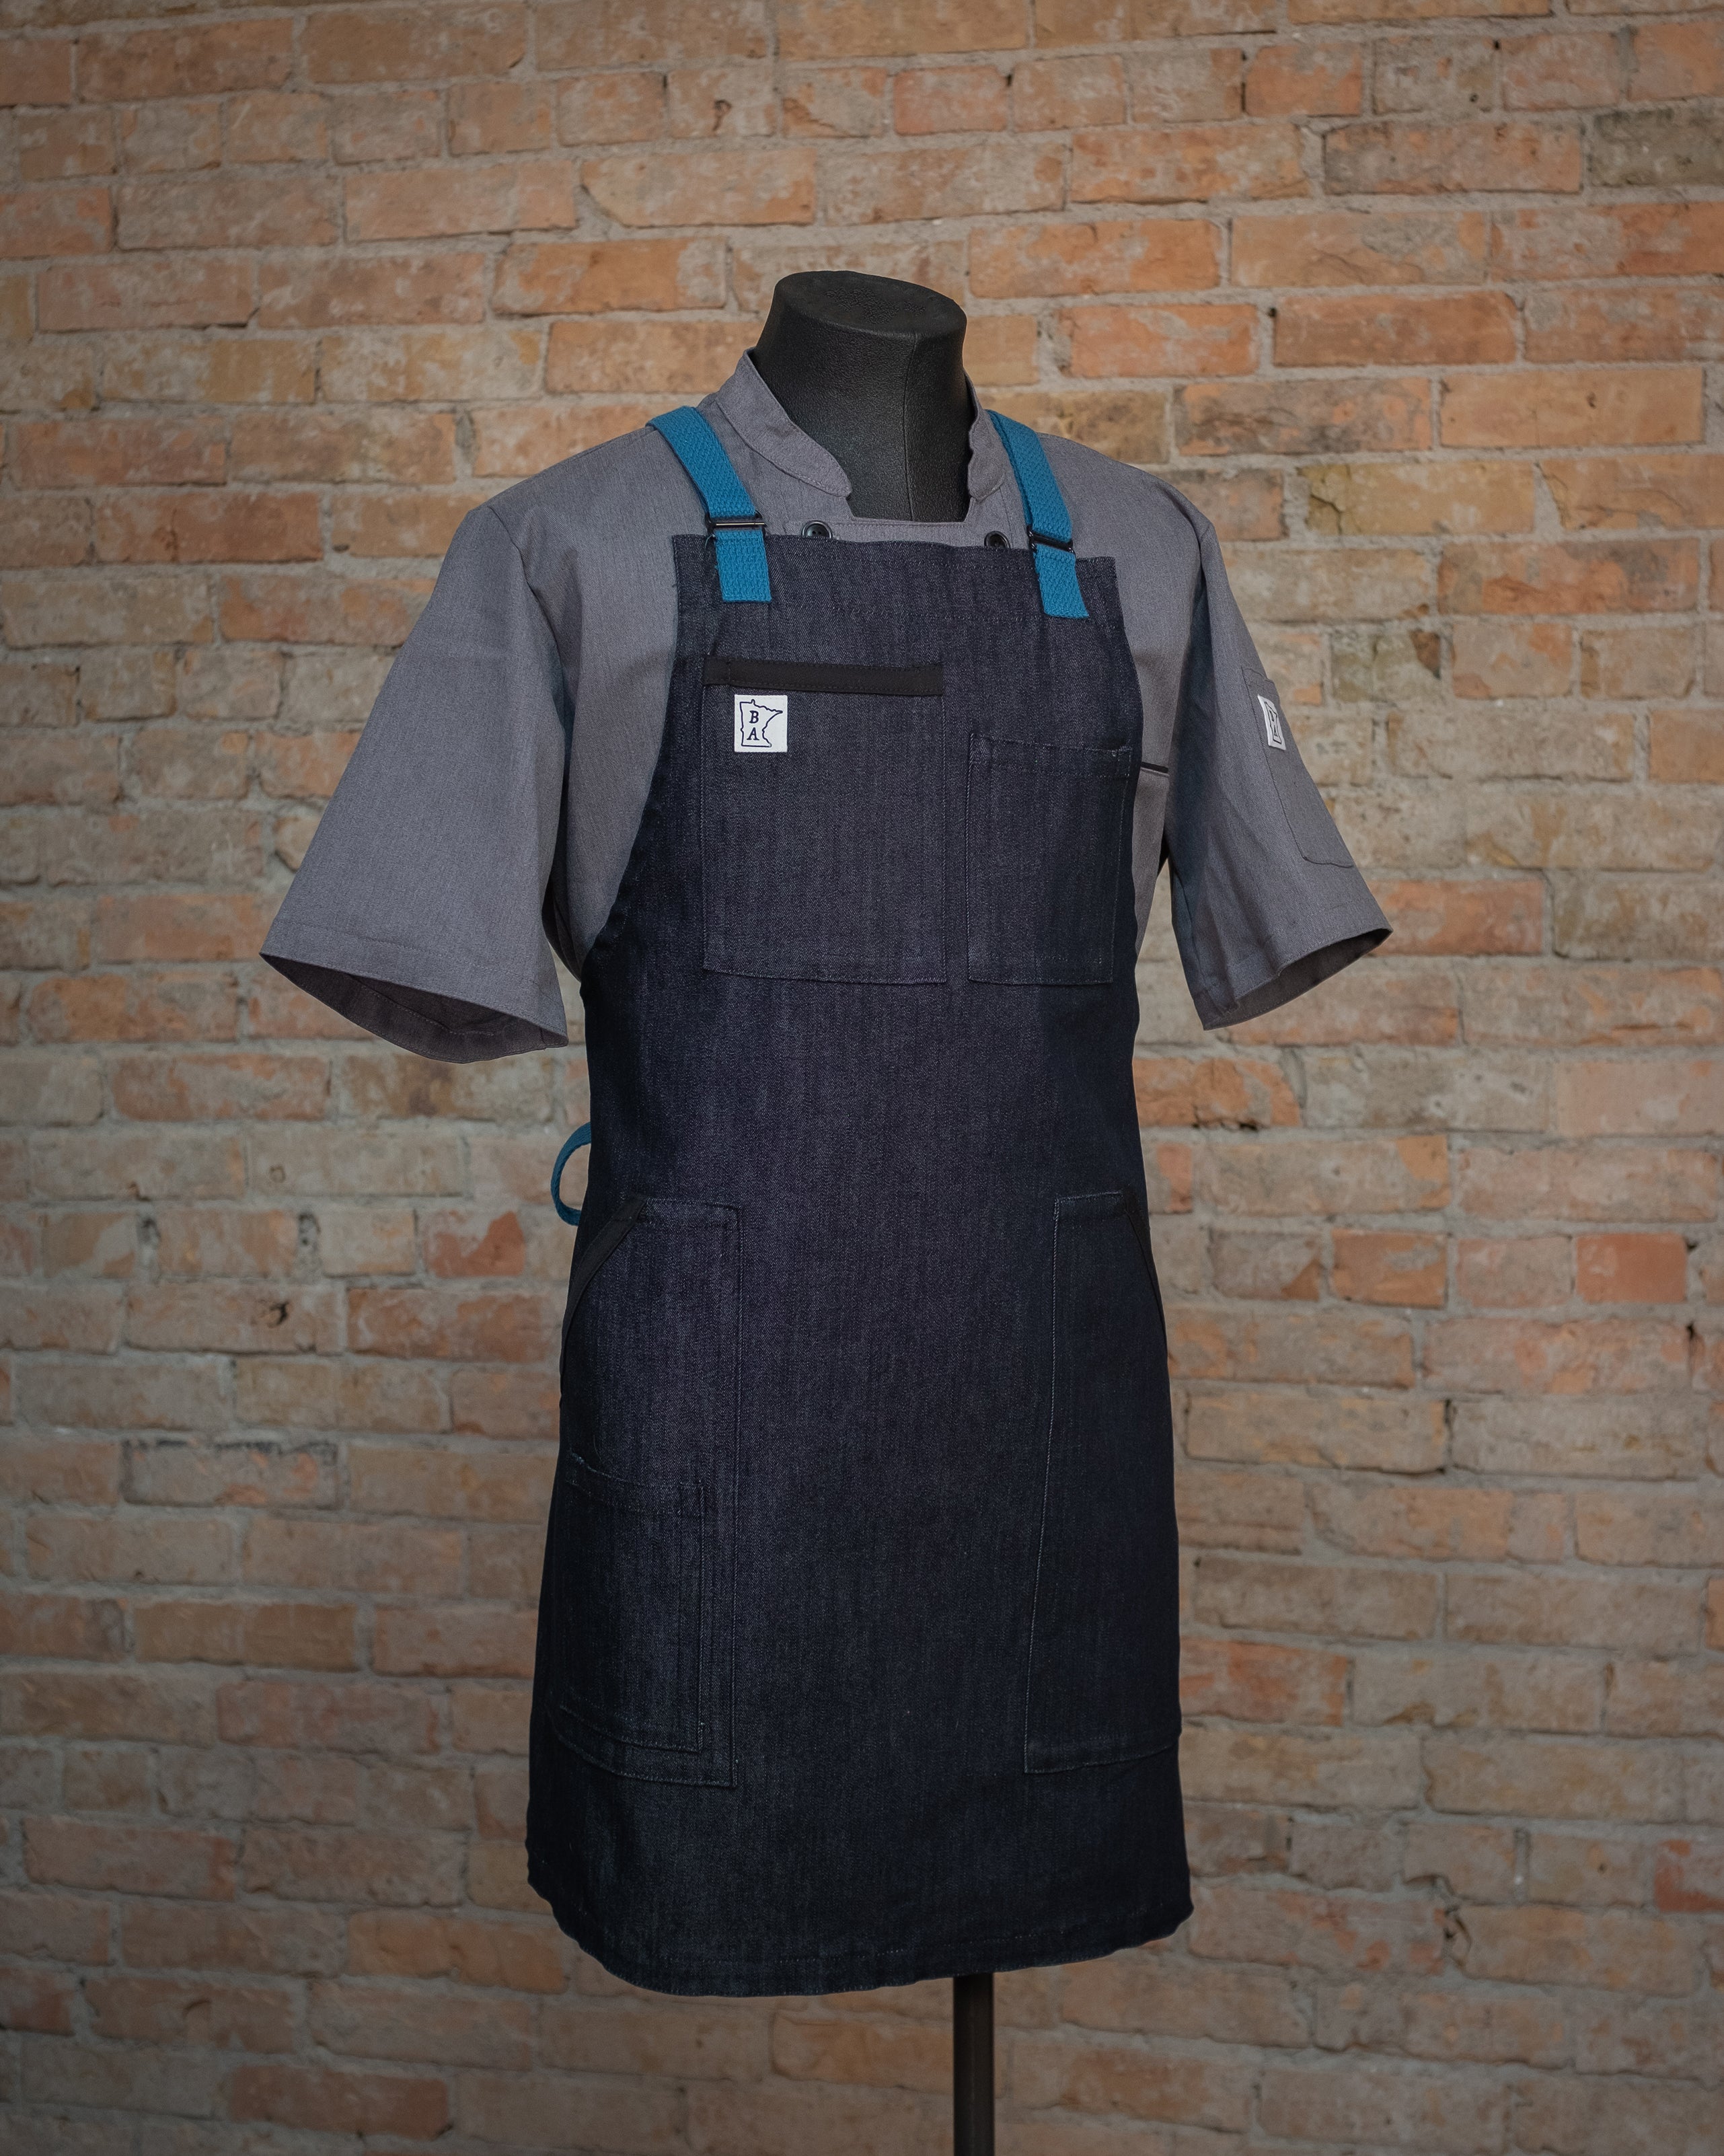 The denim apron 'Black and Blue', displayed on a mannequin over a gray chef coat. Both the chef coat and apron were designed and produced by Craftmade Aprons in Minnesota. This  apron helps represent Project Black and Blue, with 50% of revenue going directly to people in the service industry. 